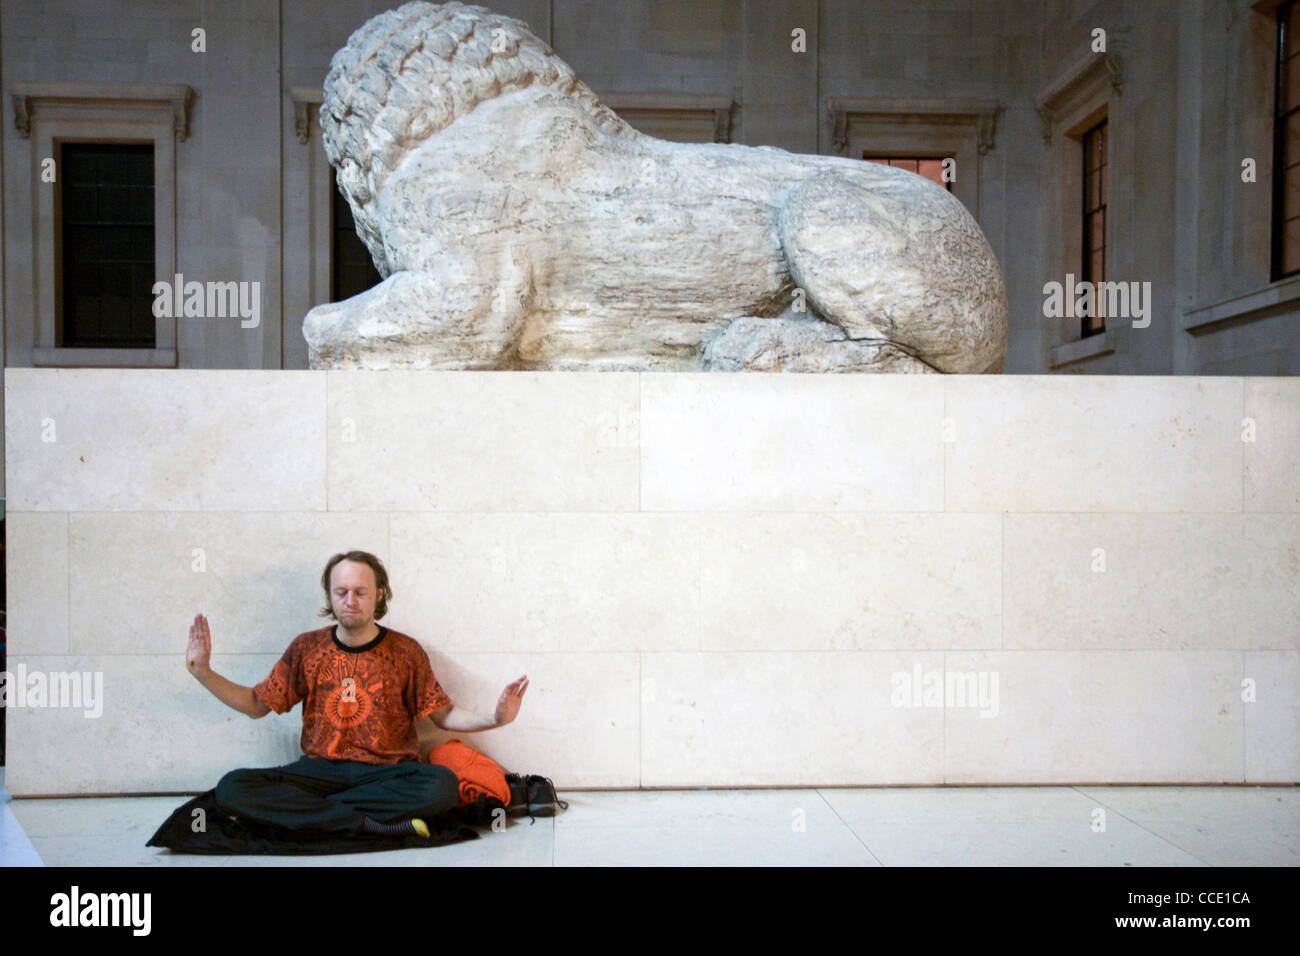 A man performs qi gong exercises - part of a meditation flash mob in the Great Court of the British Museum beneath a lion statue Stock Photo